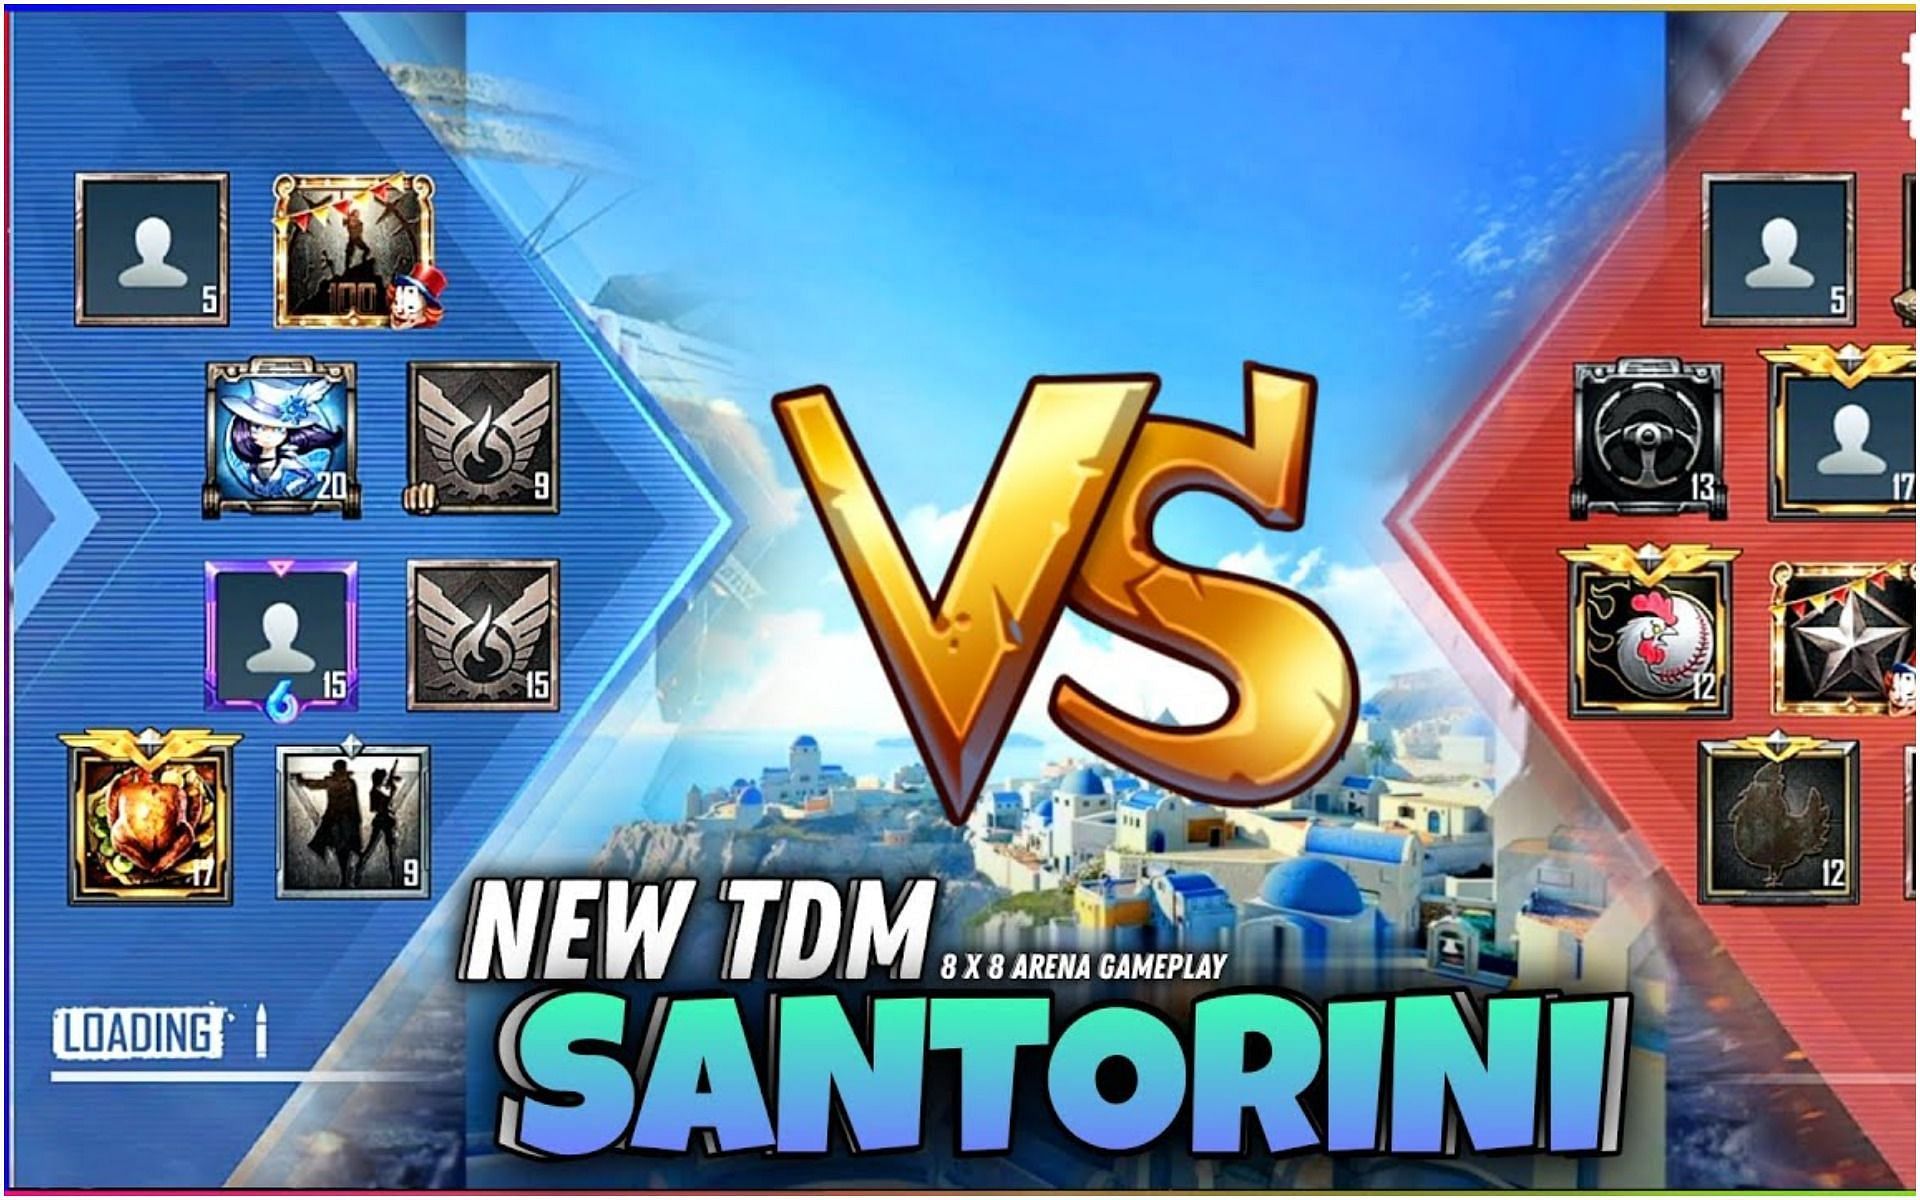 Playing the new Santorini map in PUBG Mobile (Image via YouTube)